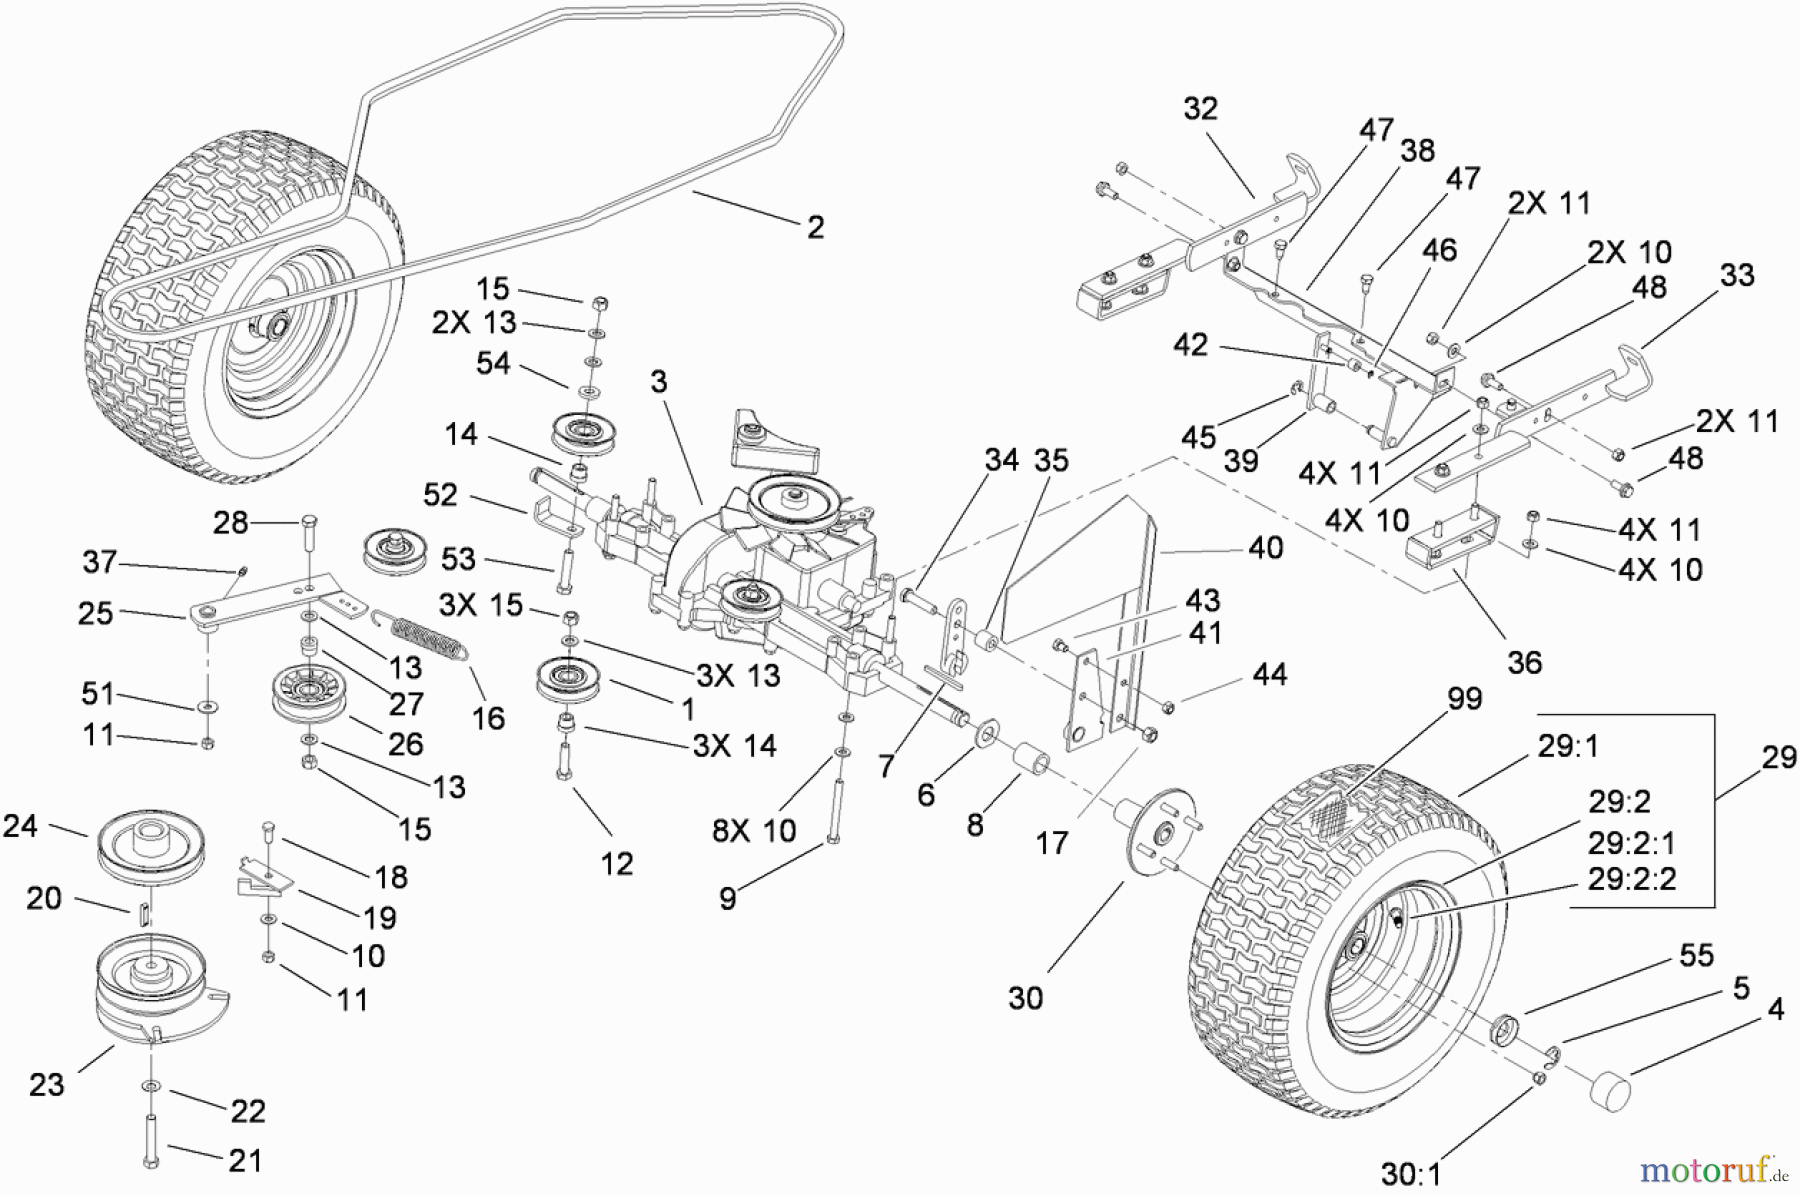  Toro Neu Mowers, Lawn & Garden Tractor Seite 1 74592 (DH 220) - Toro DH 220 Lawn Tractor, 2008 (280000001-280000528) TRANSMISSION ASSEMBLY